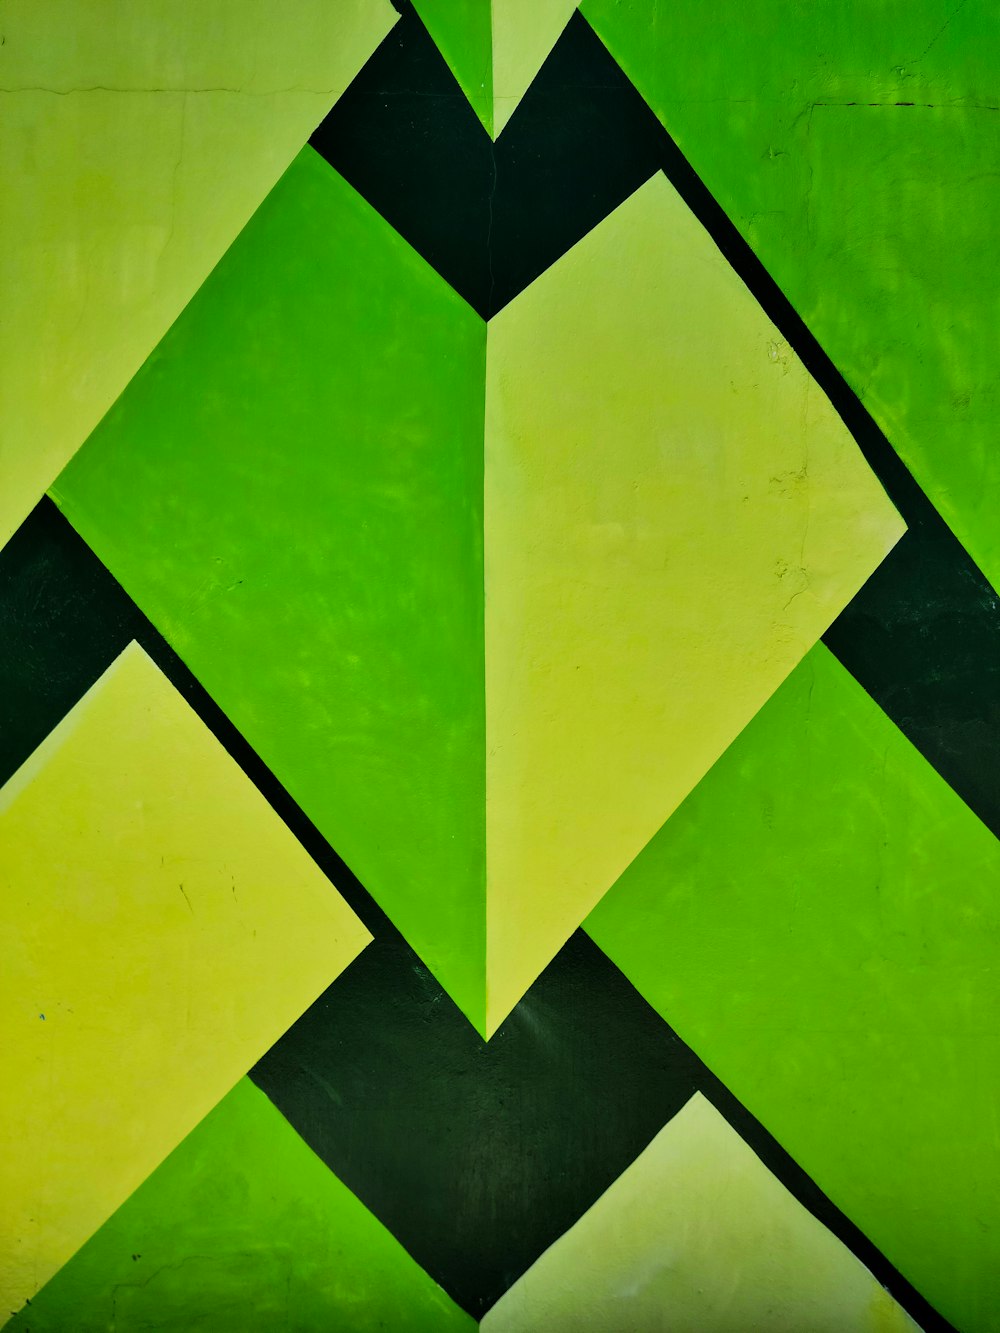 a painting of a green and yellow geometric design